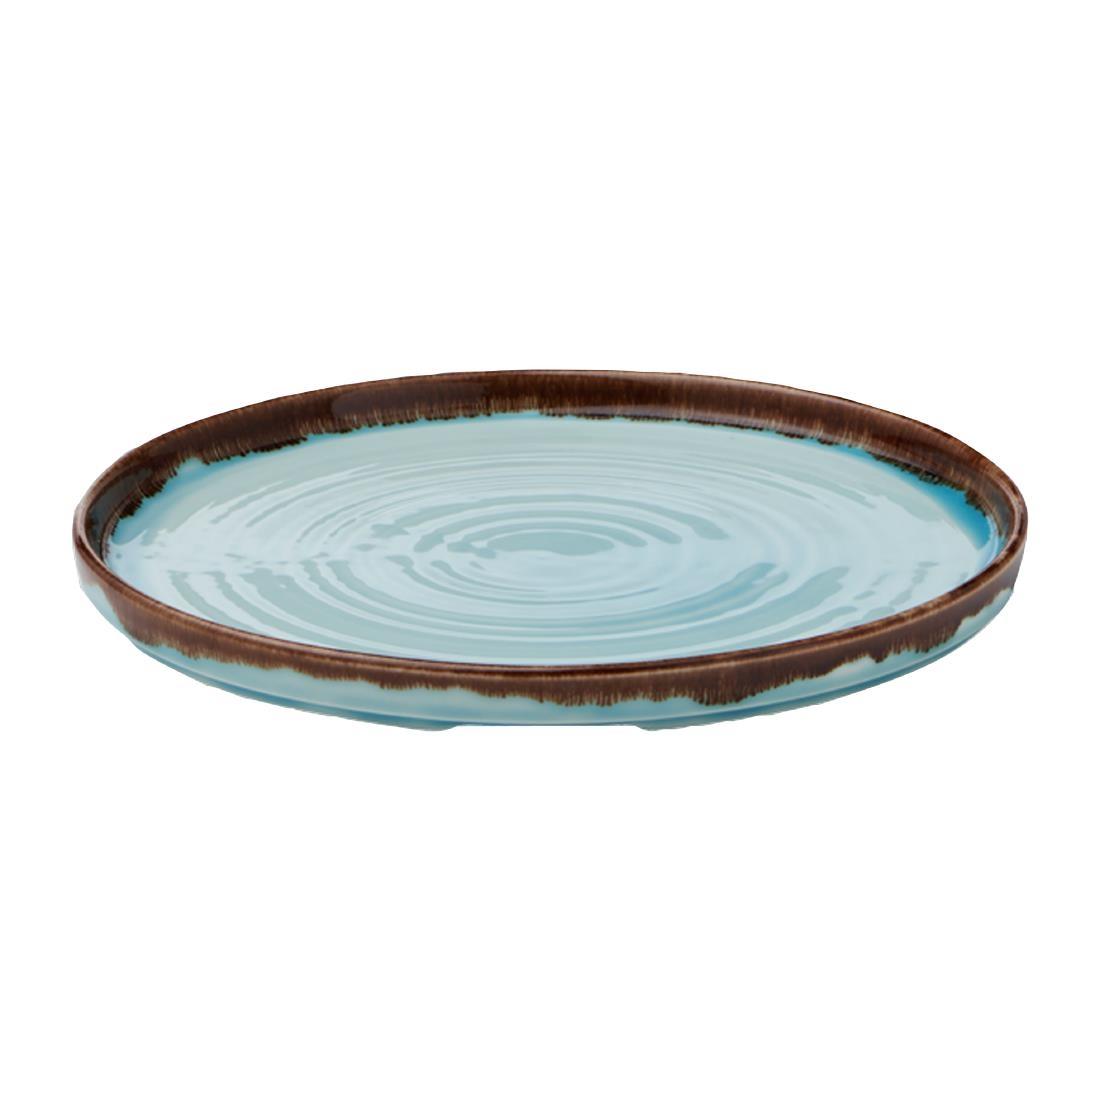 Dudson Harvest Walled Plates Turquoise 260mm (Pack of 6) - FX170  - 2